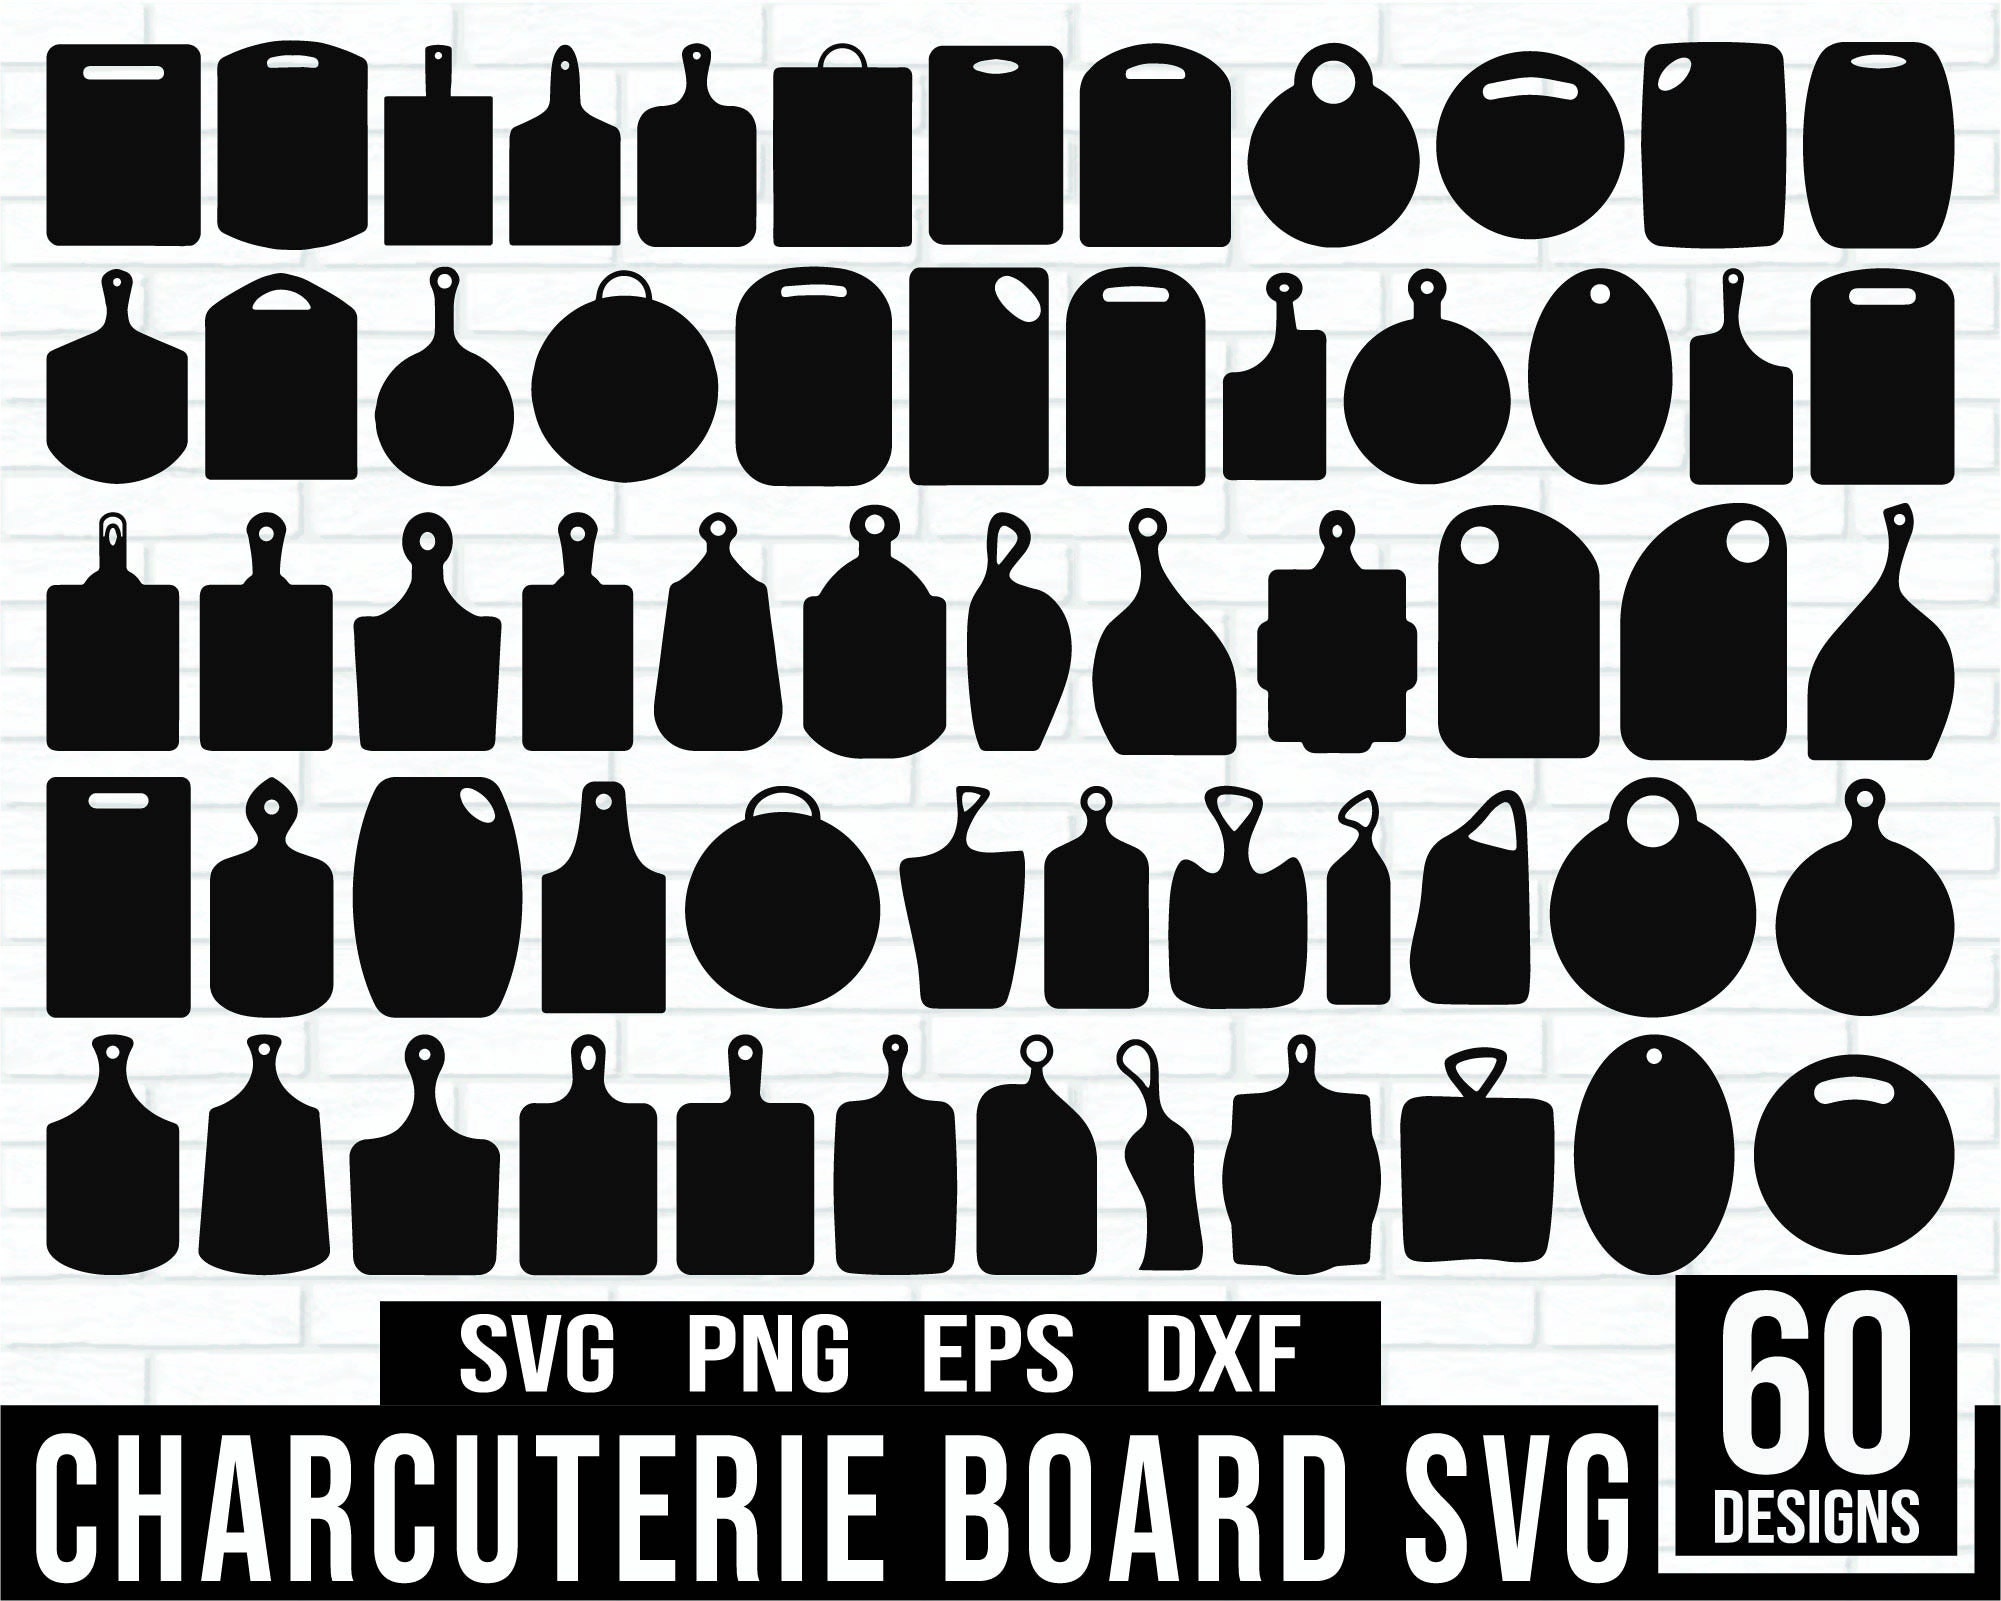 60 Cutting Board Svg Bundle, DXF Cutting boards silhouettes, Boards for  serving dishes cdr, dxf Laser cutting kit, vector file, Wooden plate for  kitchen wood working cnc Template Clipart. - So Fontsy